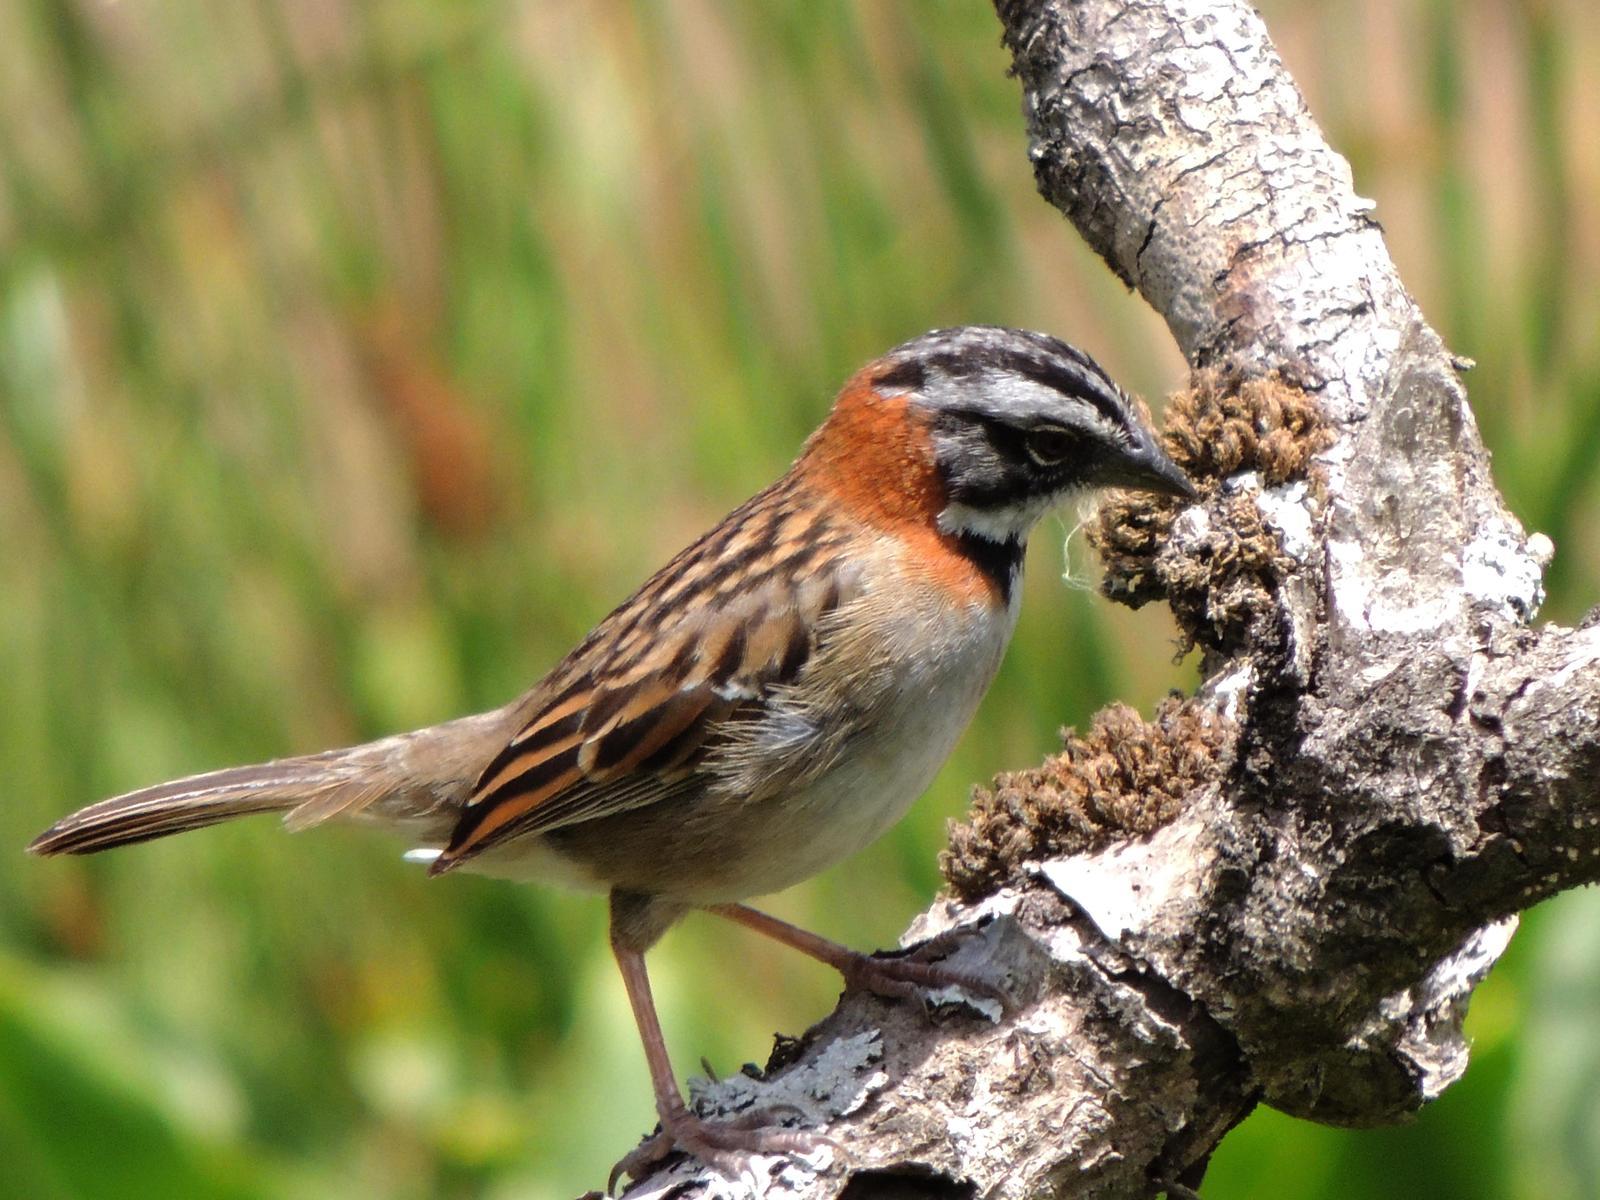 Rufous-collared Sparrow Photo by GREG THOMAS